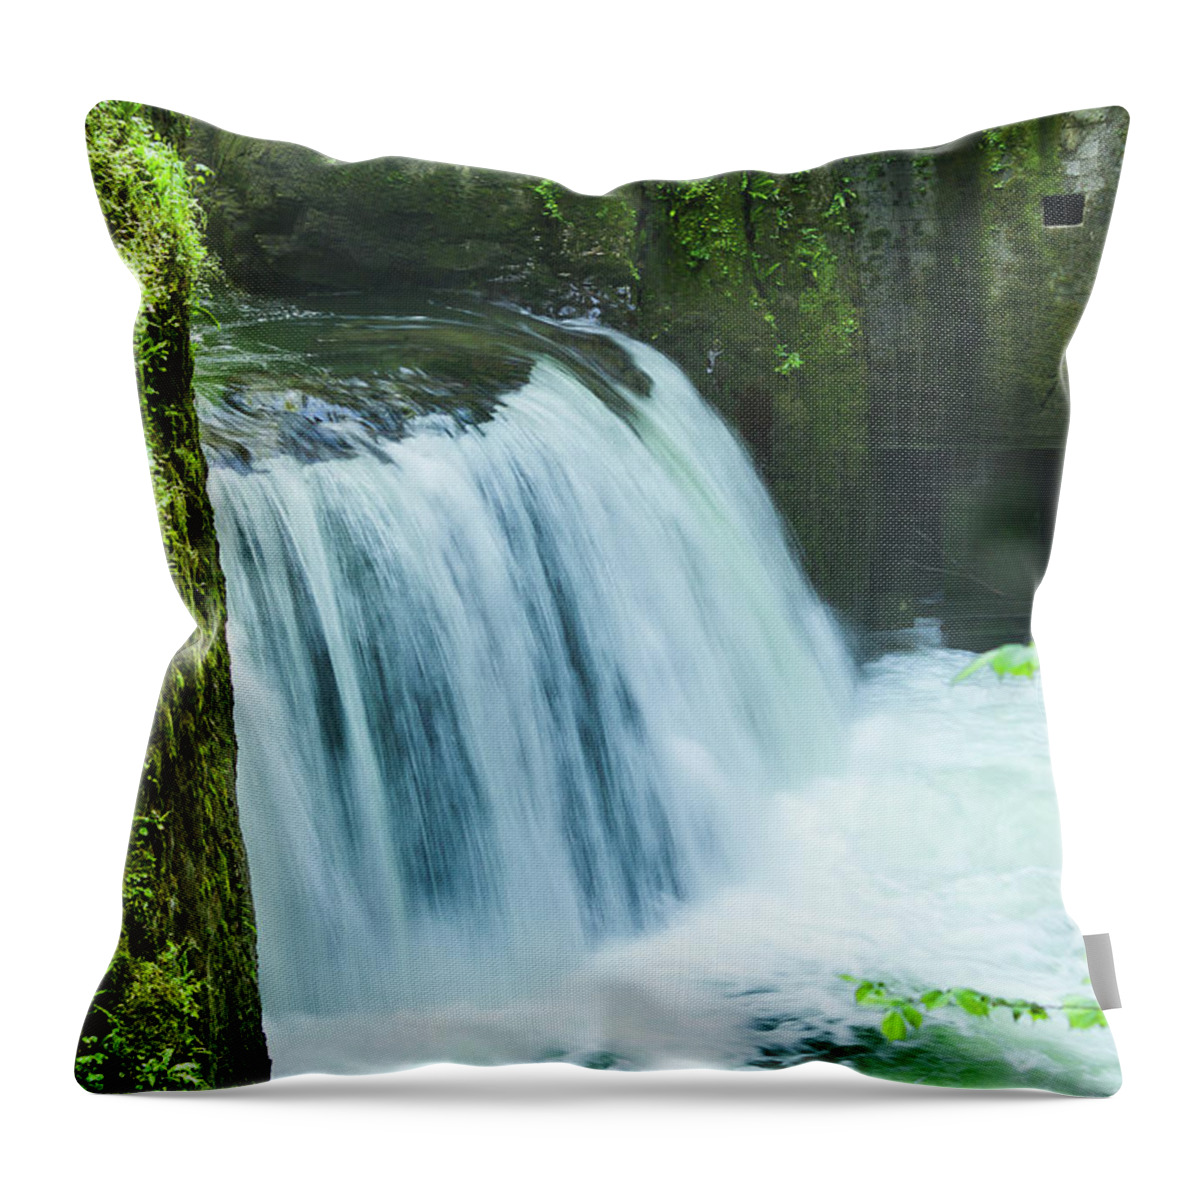 Waterfall Landscape Throw Pillow featuring the photograph Waterfall by Paul MAURICE